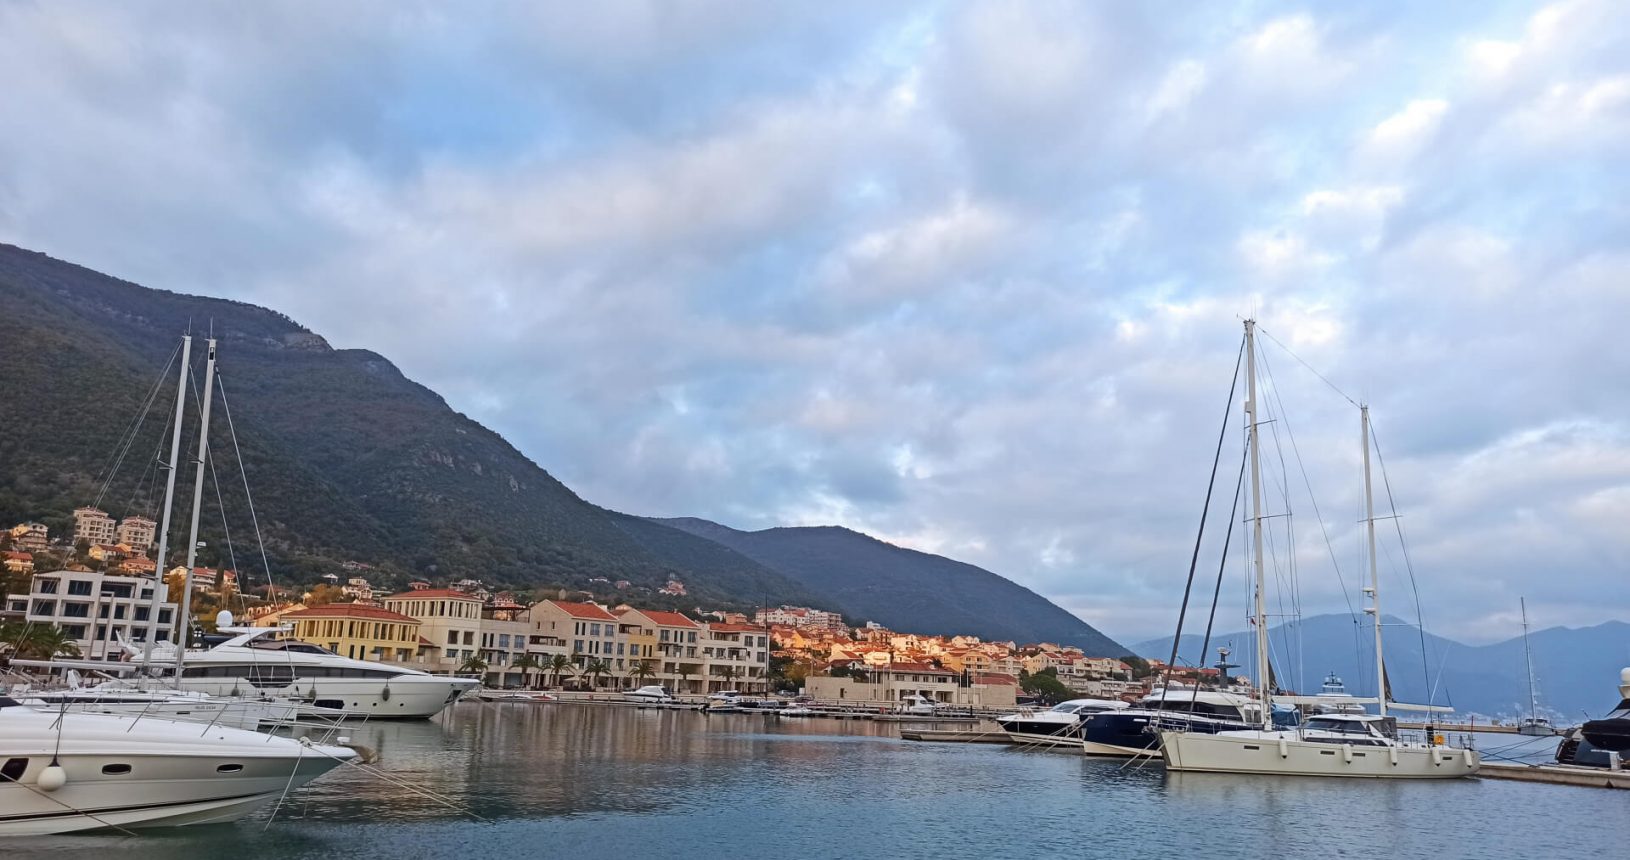 Yachts and mountains in Portonovi